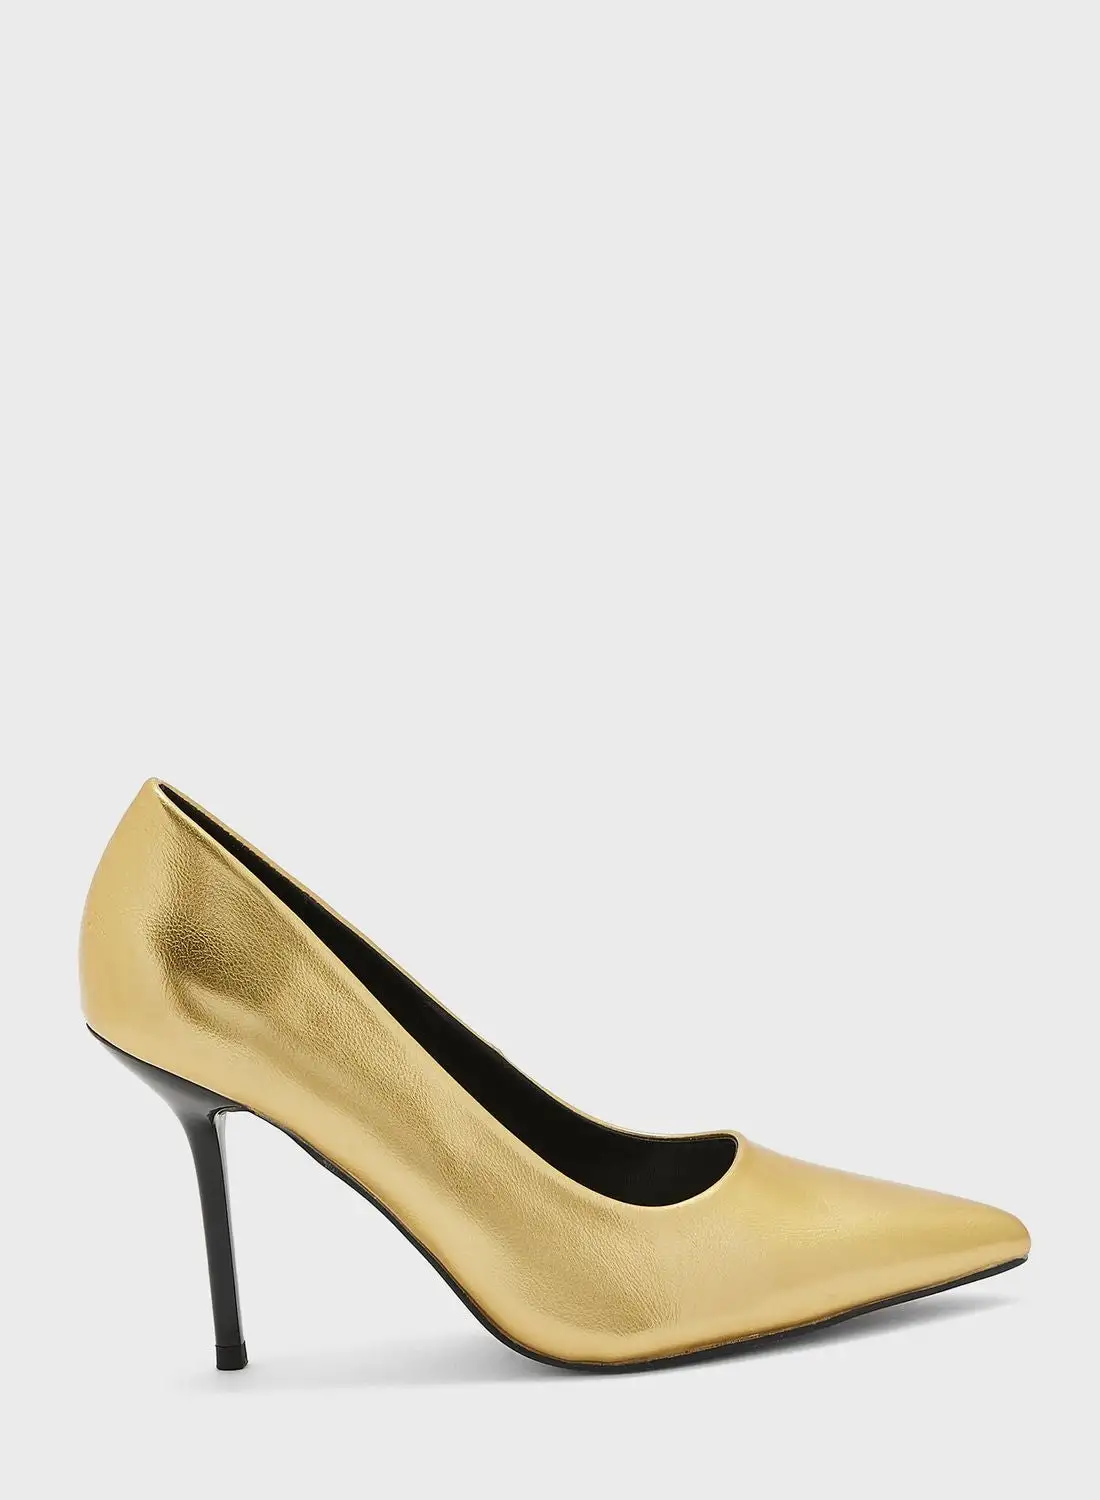 TOPSHOP Pointed Toe Pumps